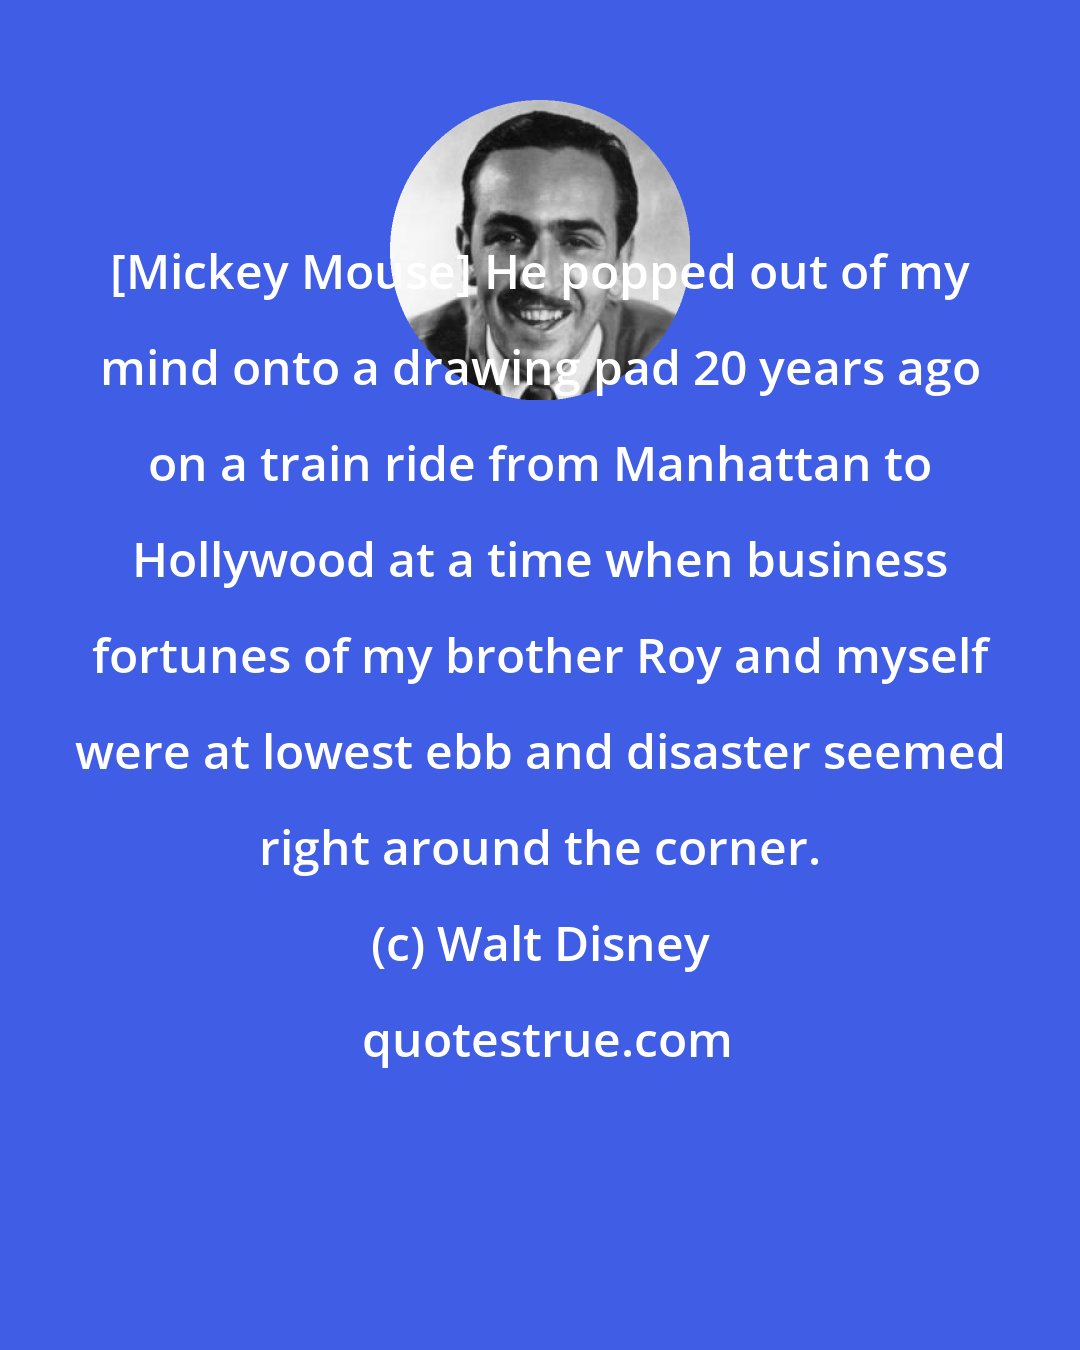 Walt Disney: [Mickey Mouse] He popped out of my mind onto a drawing pad 20 years ago on a train ride from Manhattan to Hollywood at a time when business fortunes of my brother Roy and myself were at lowest ebb and disaster seemed right around the corner.